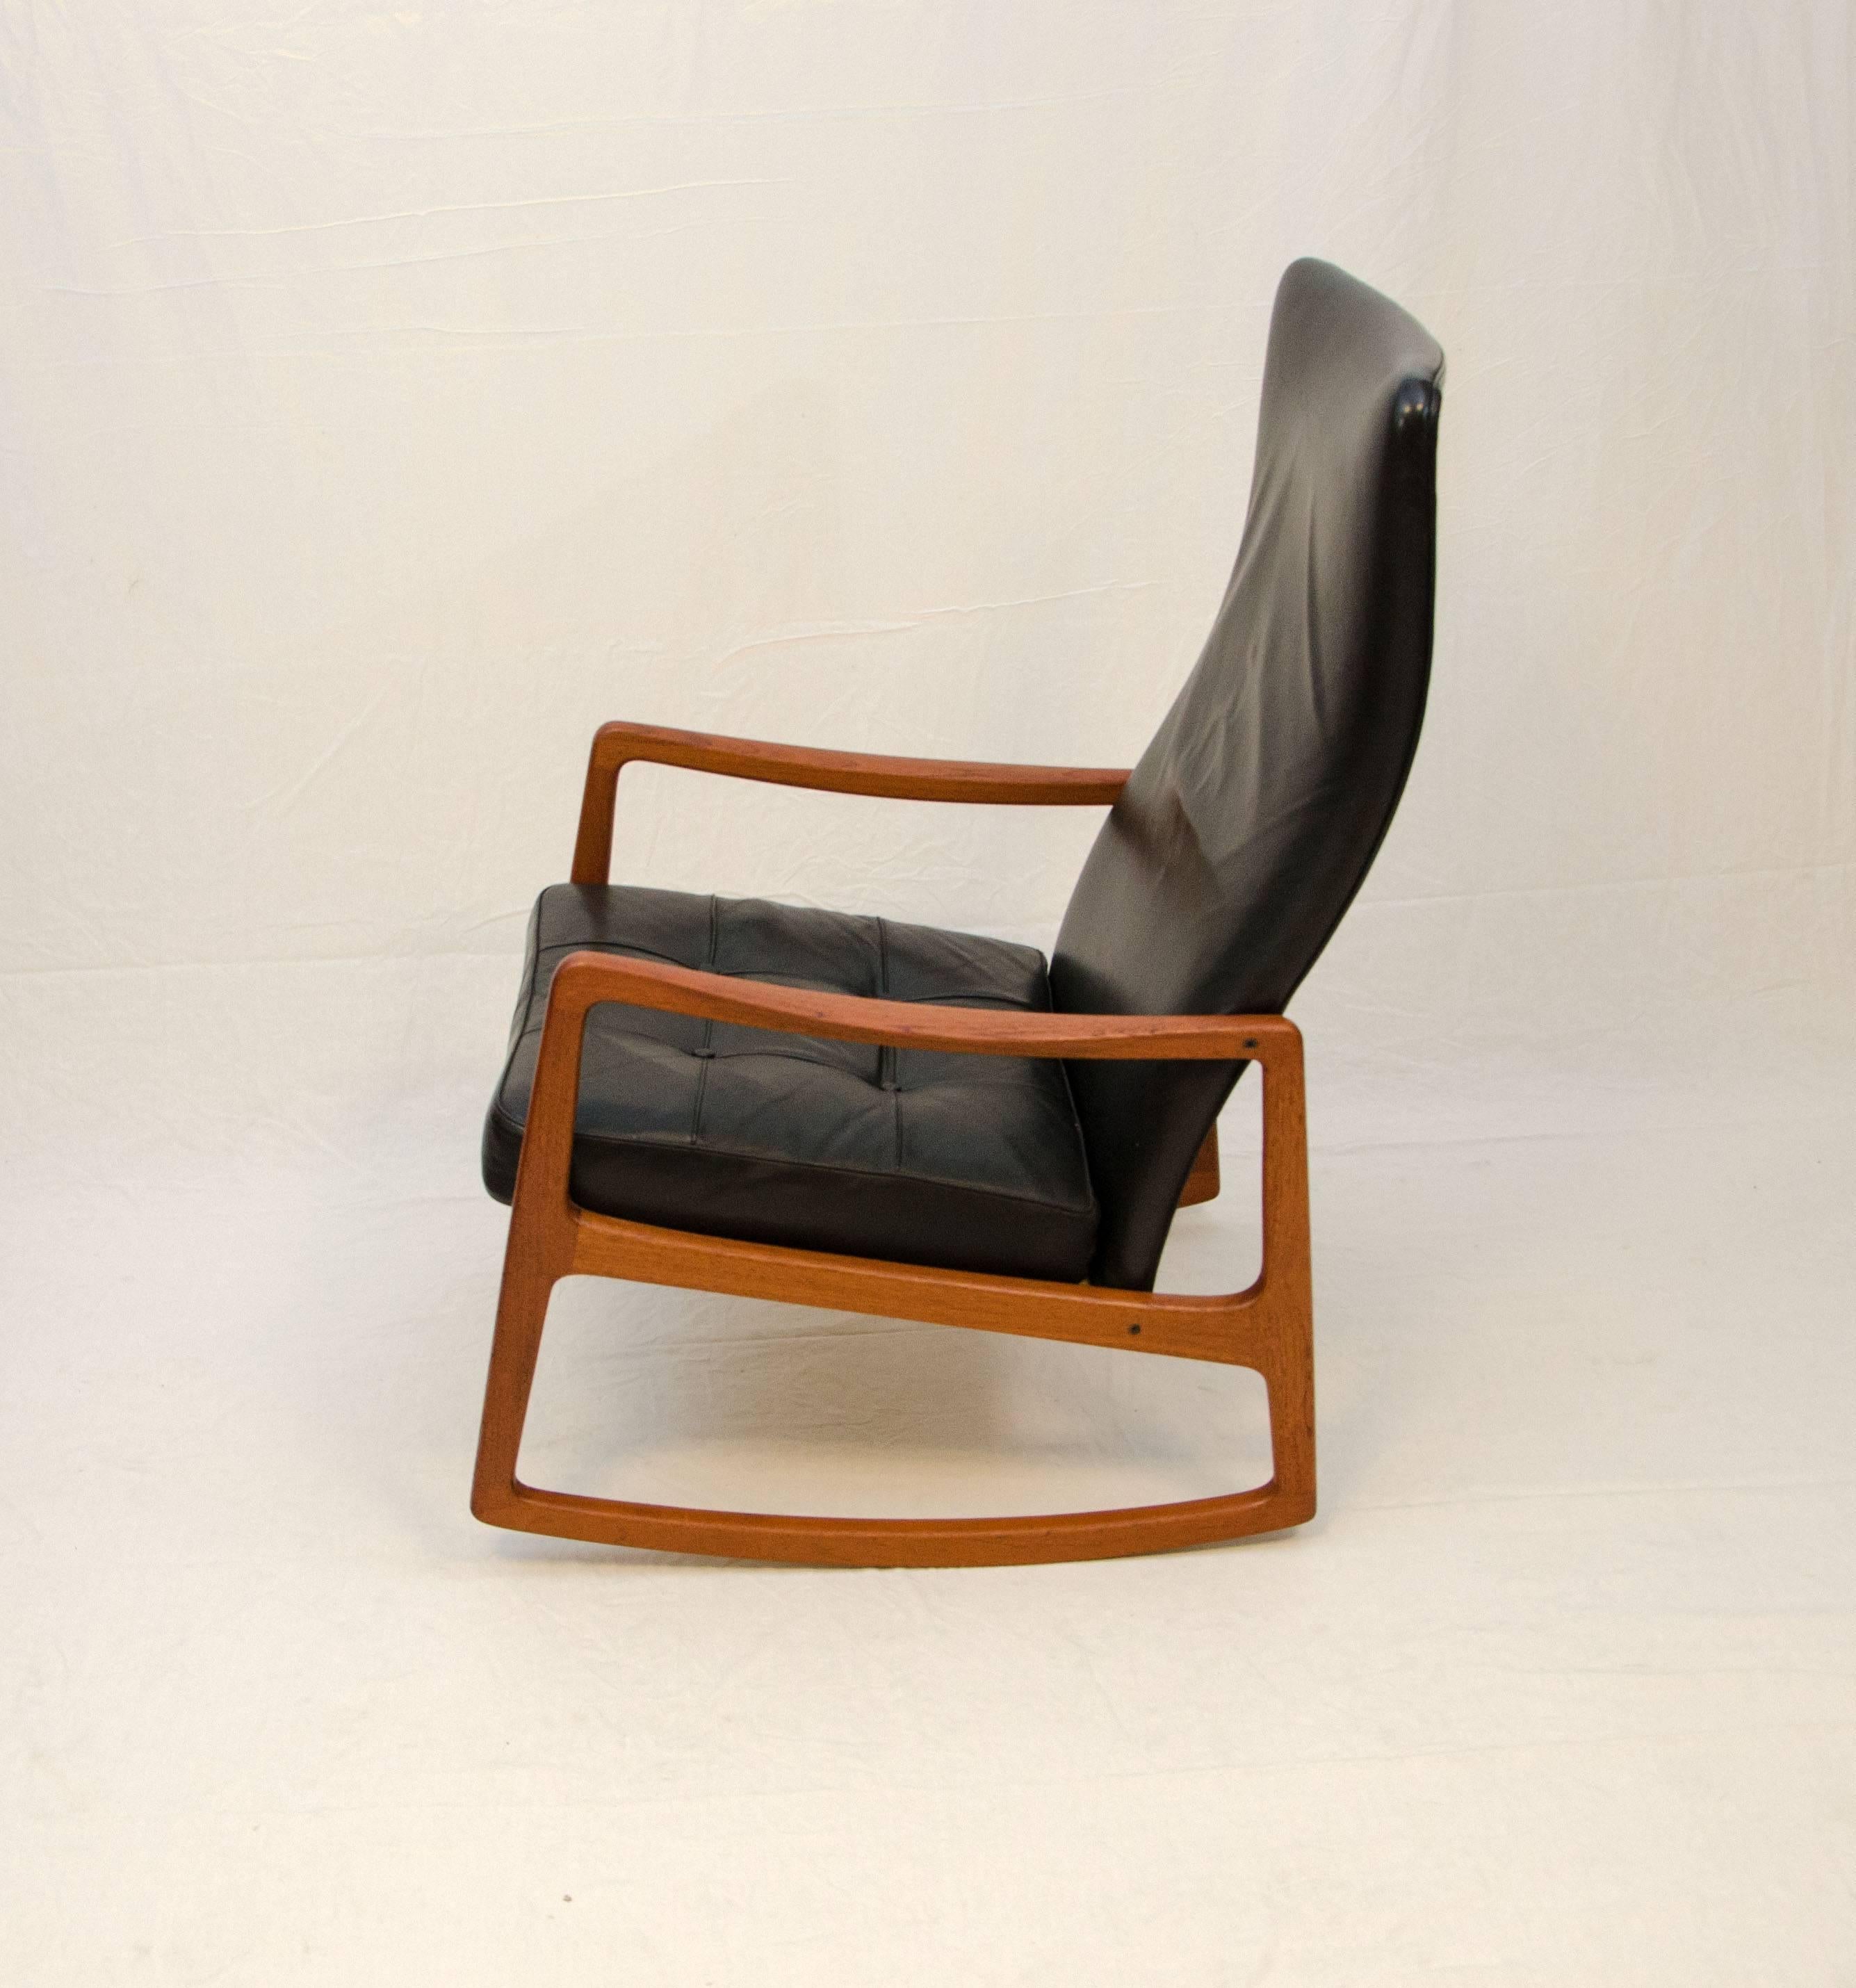 Danish Teak and Leather High Back Rocking Chair by Ole Wanscher In Good Condition For Sale In Crockett, CA